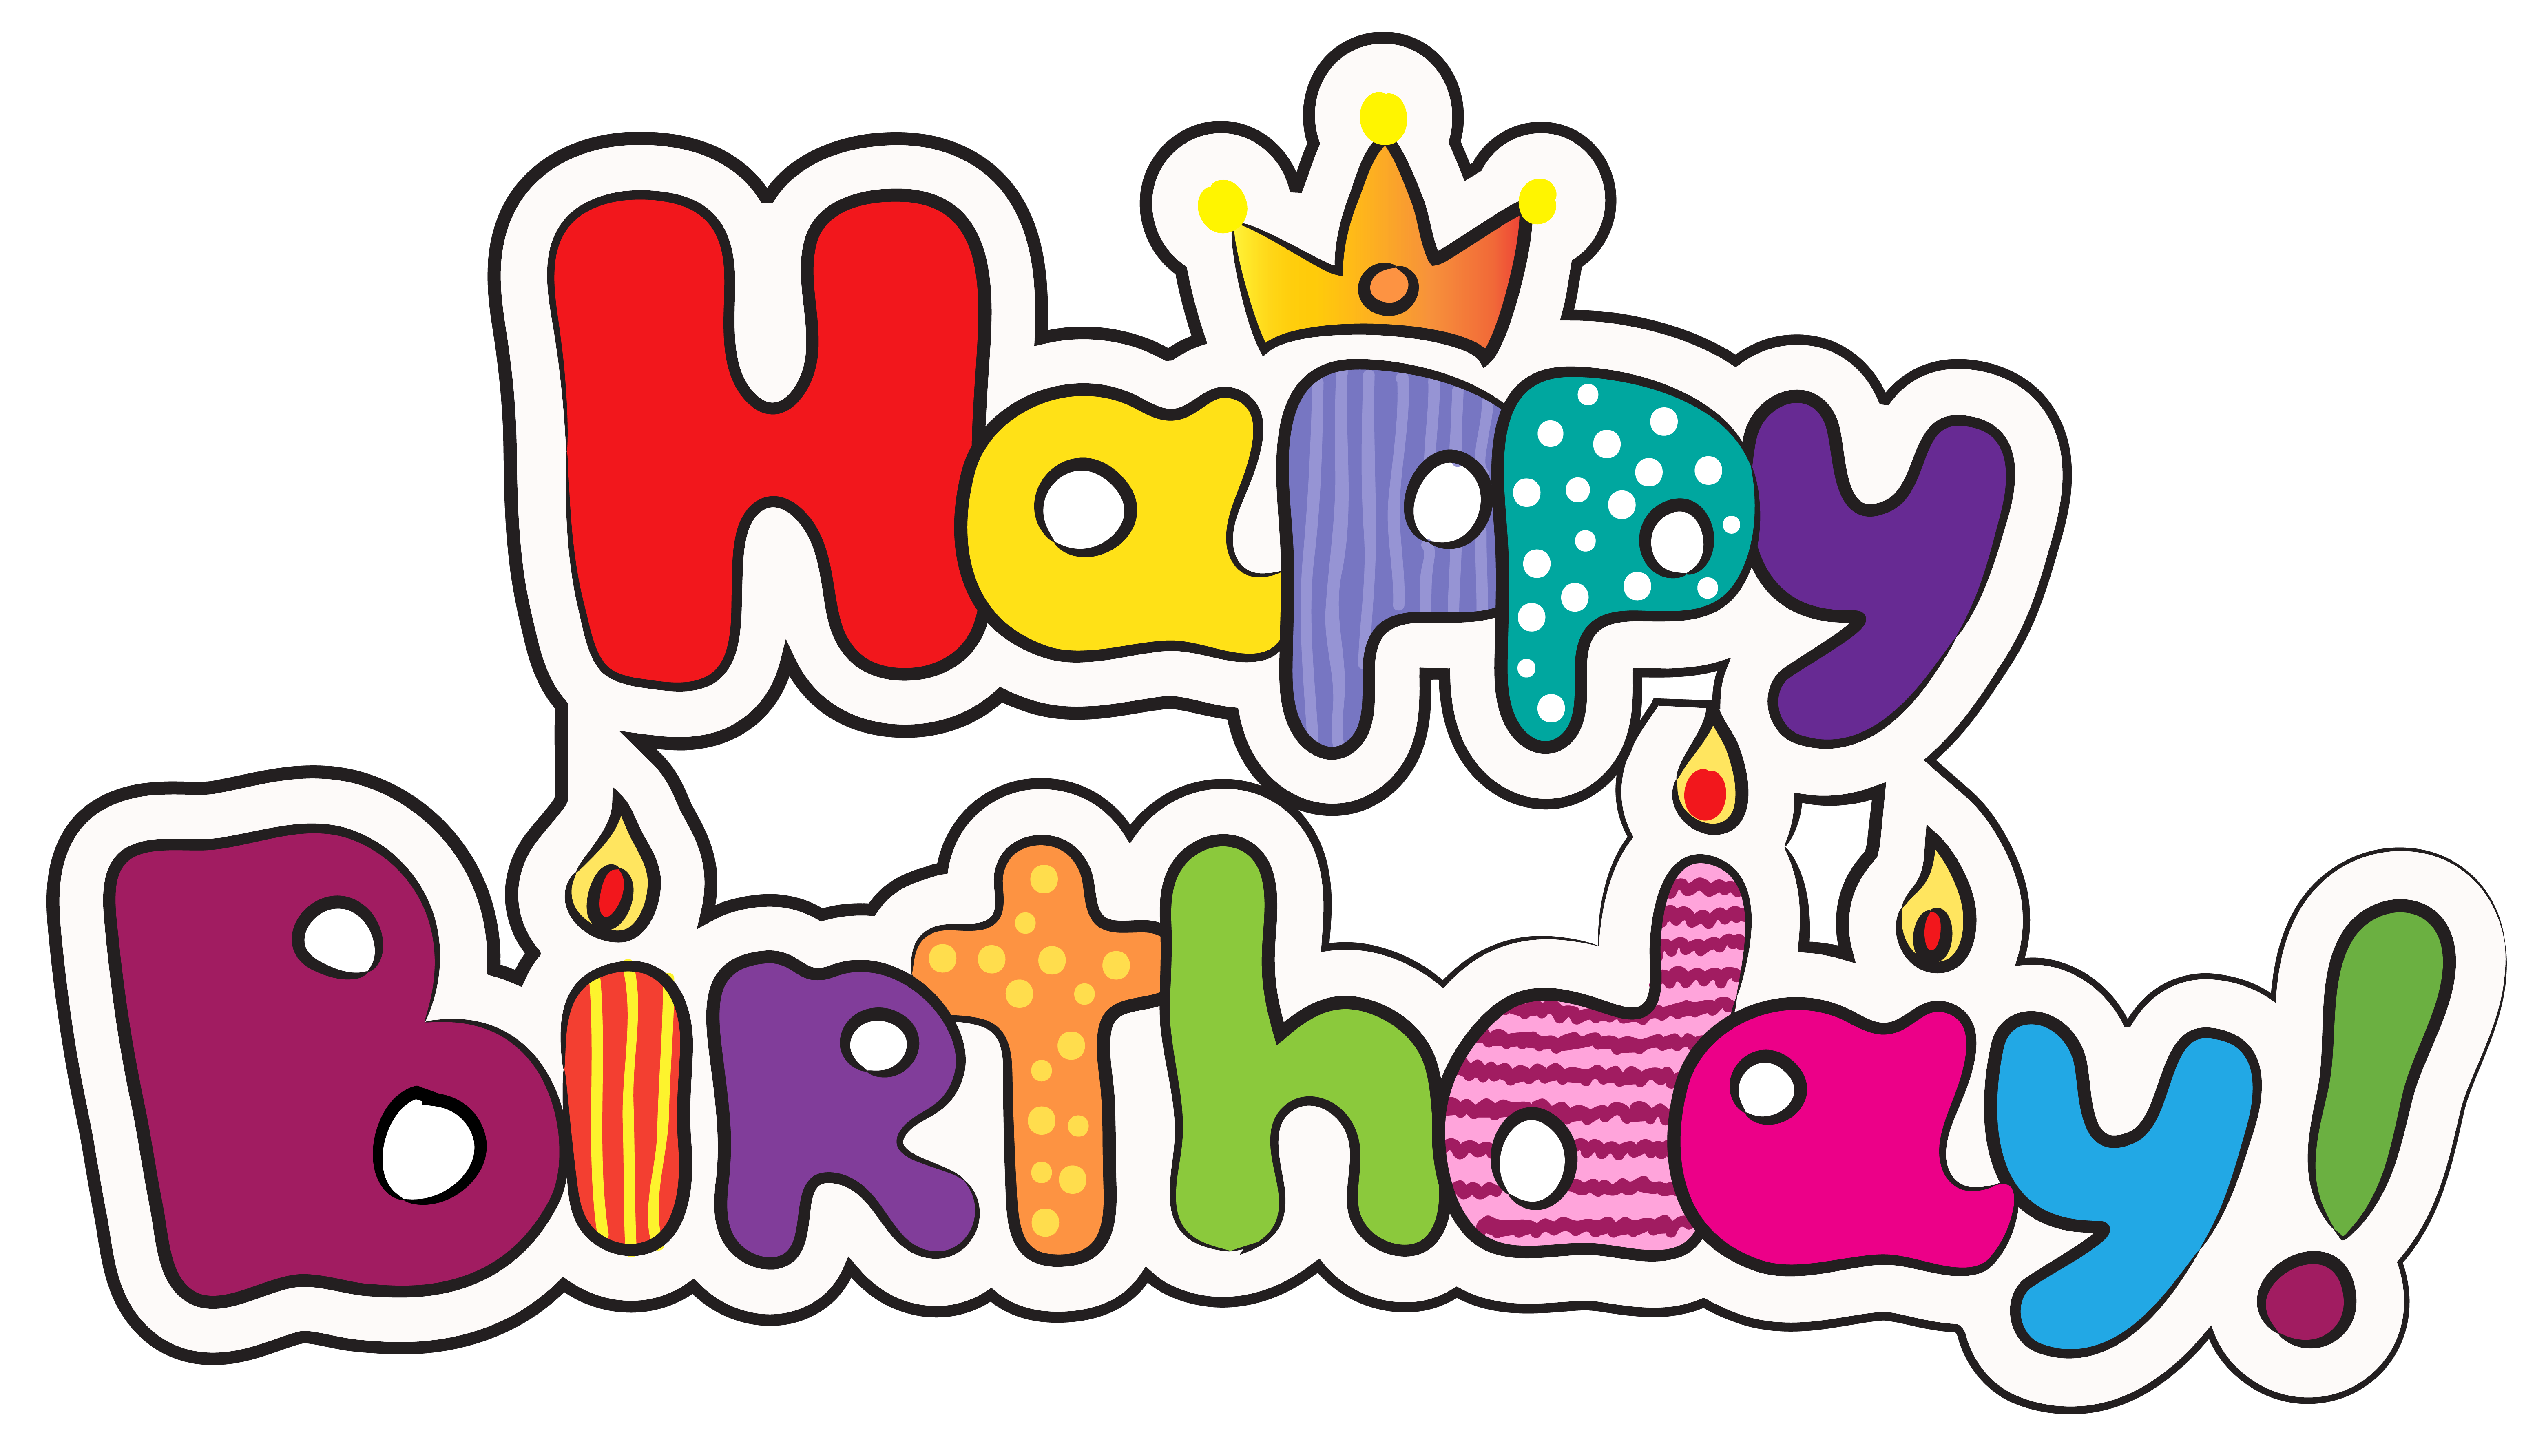 Birthday clipart logo. Colorful happy png image